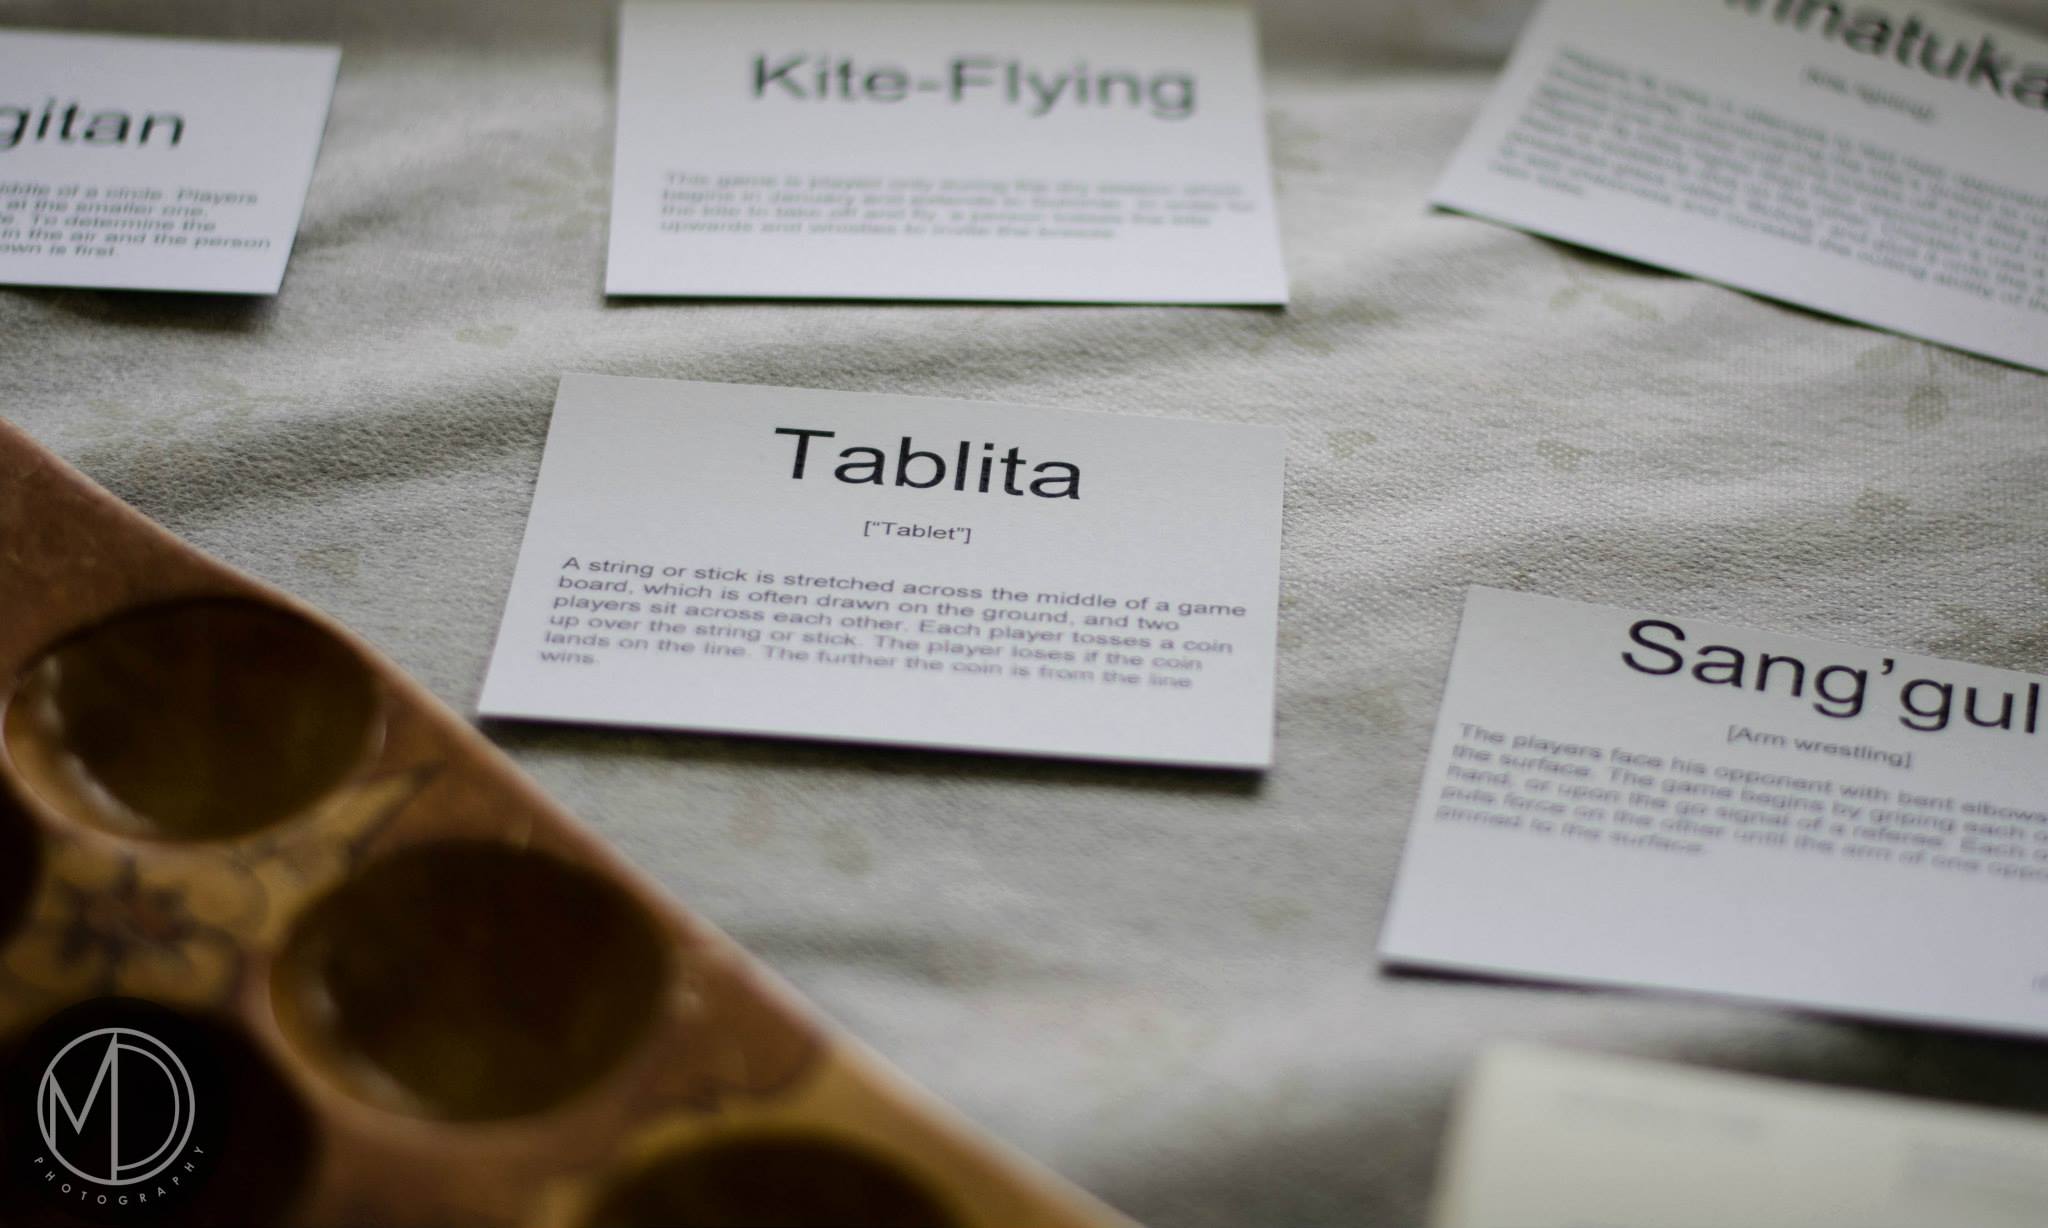 Close up of cards describing traditional Filipino games and sunca board on The Field Museum's table in the Cultural tent. (c) Field Museum of Natural History - CC BY-NC 4.0